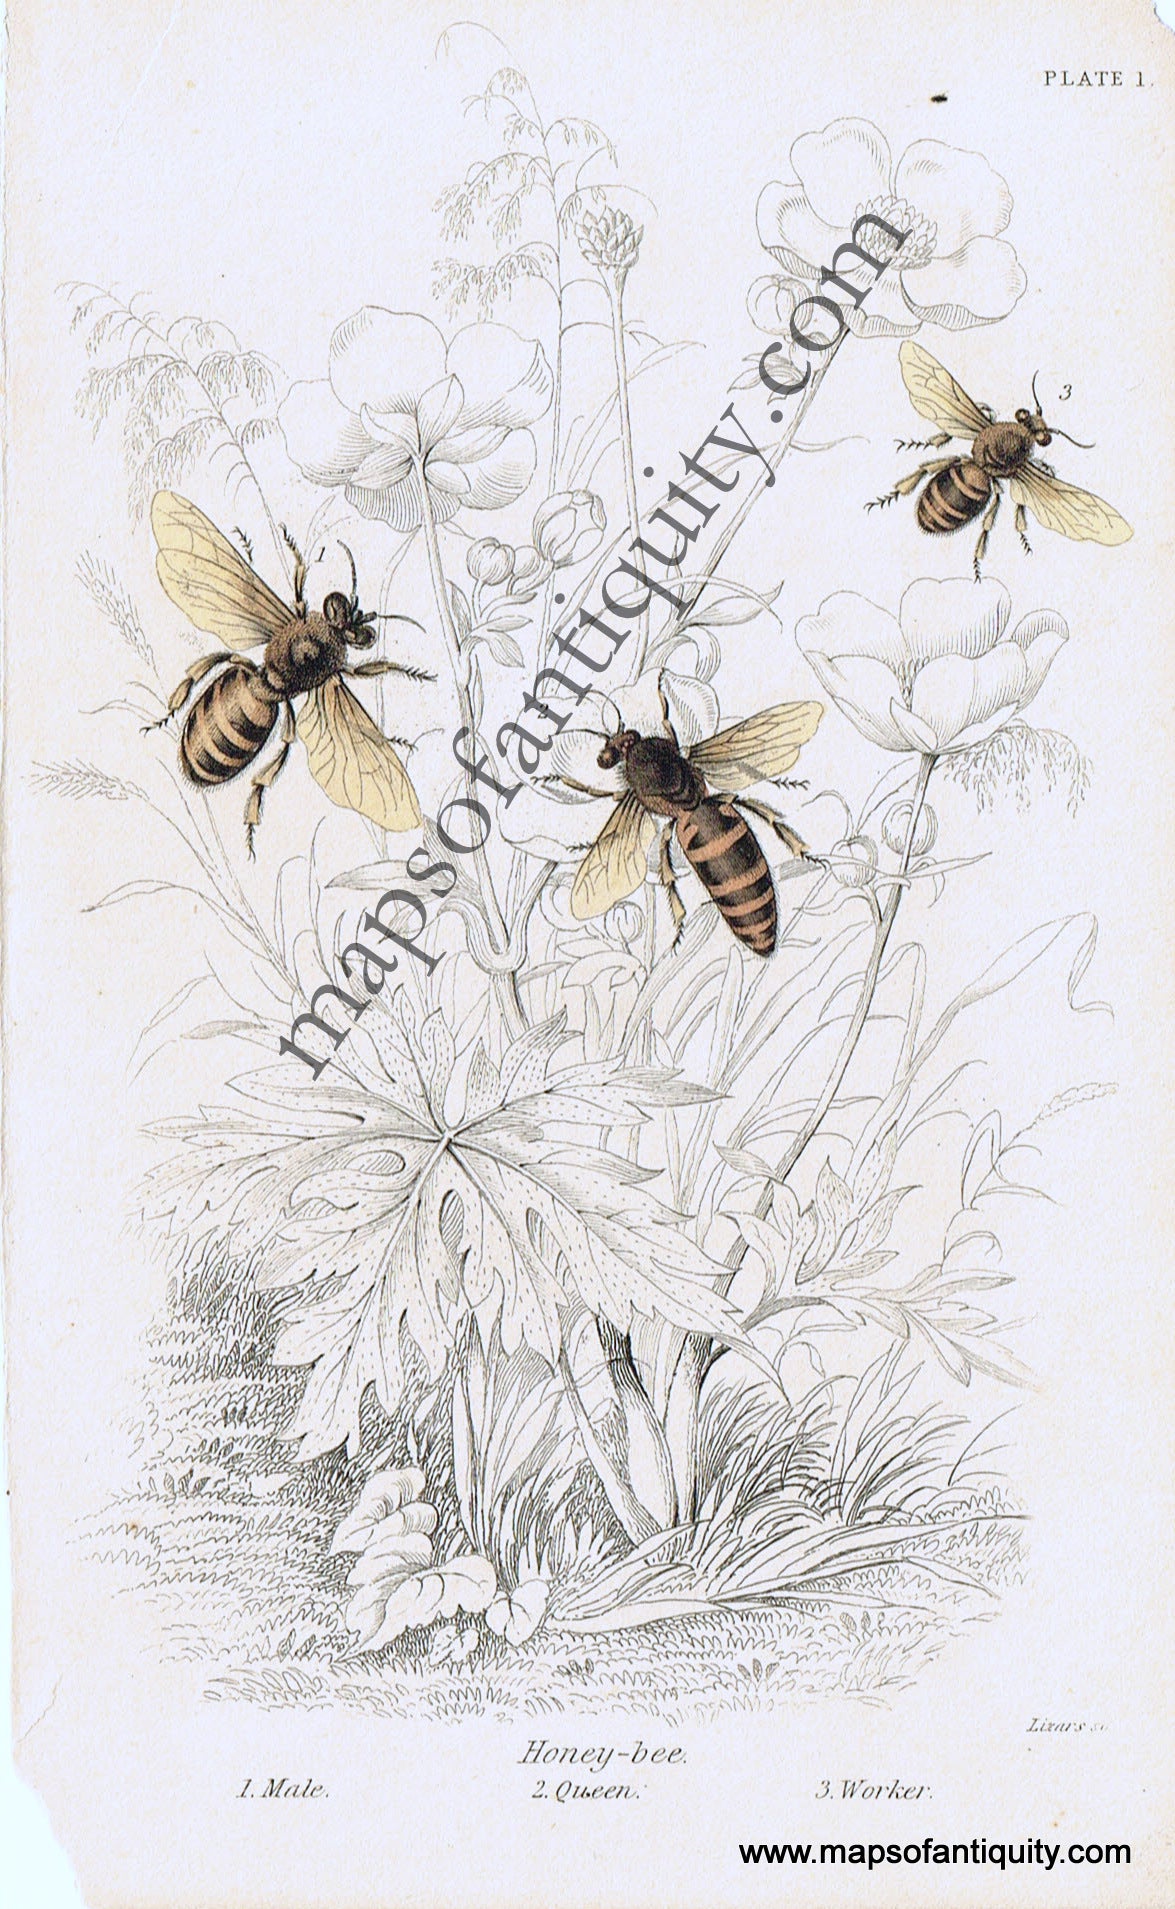 Antique-Hand-Colored-Print-Honey-bee--Antique-Prints-Natural-History-Insects-1840-Duncan-Maps-Of-Antiquity